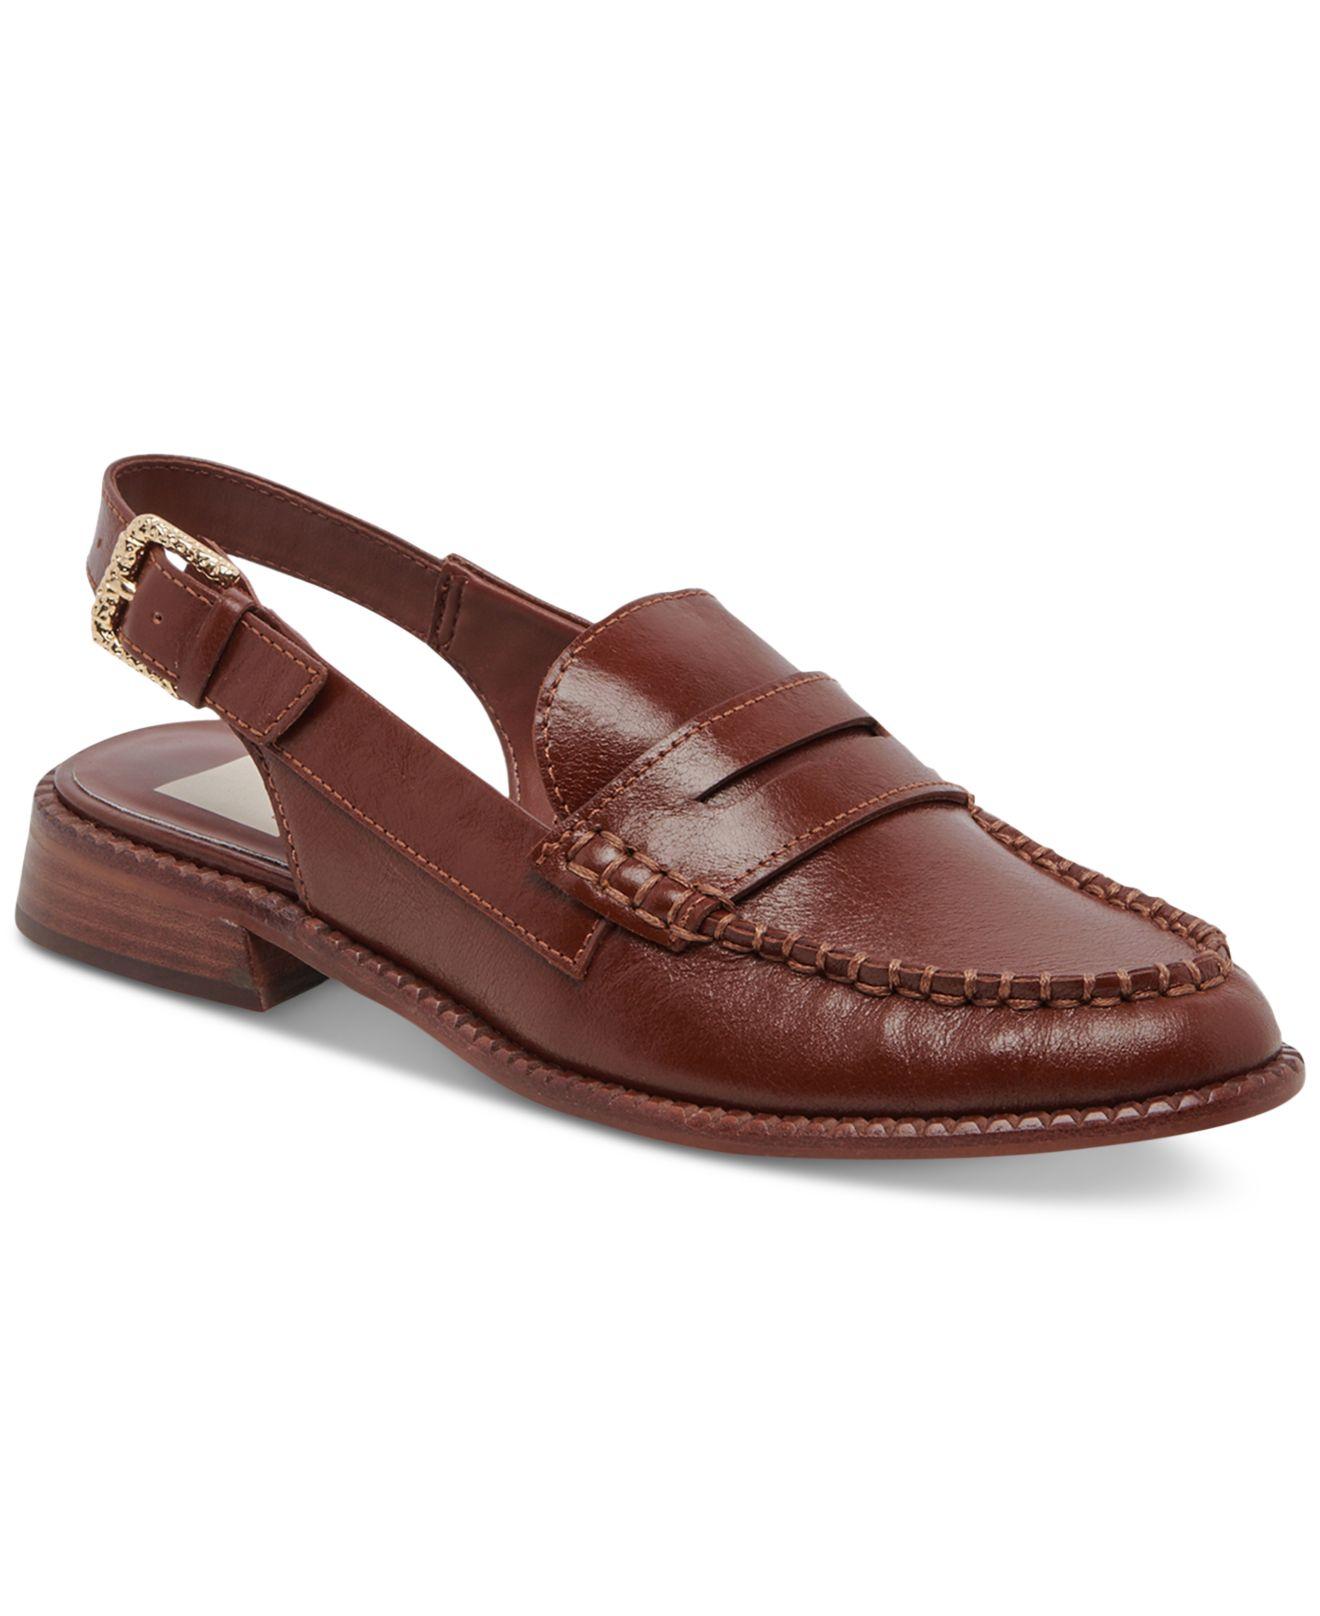 Dolce Vita Hardi Tailored Slingback Loafers in Brown | Lyst